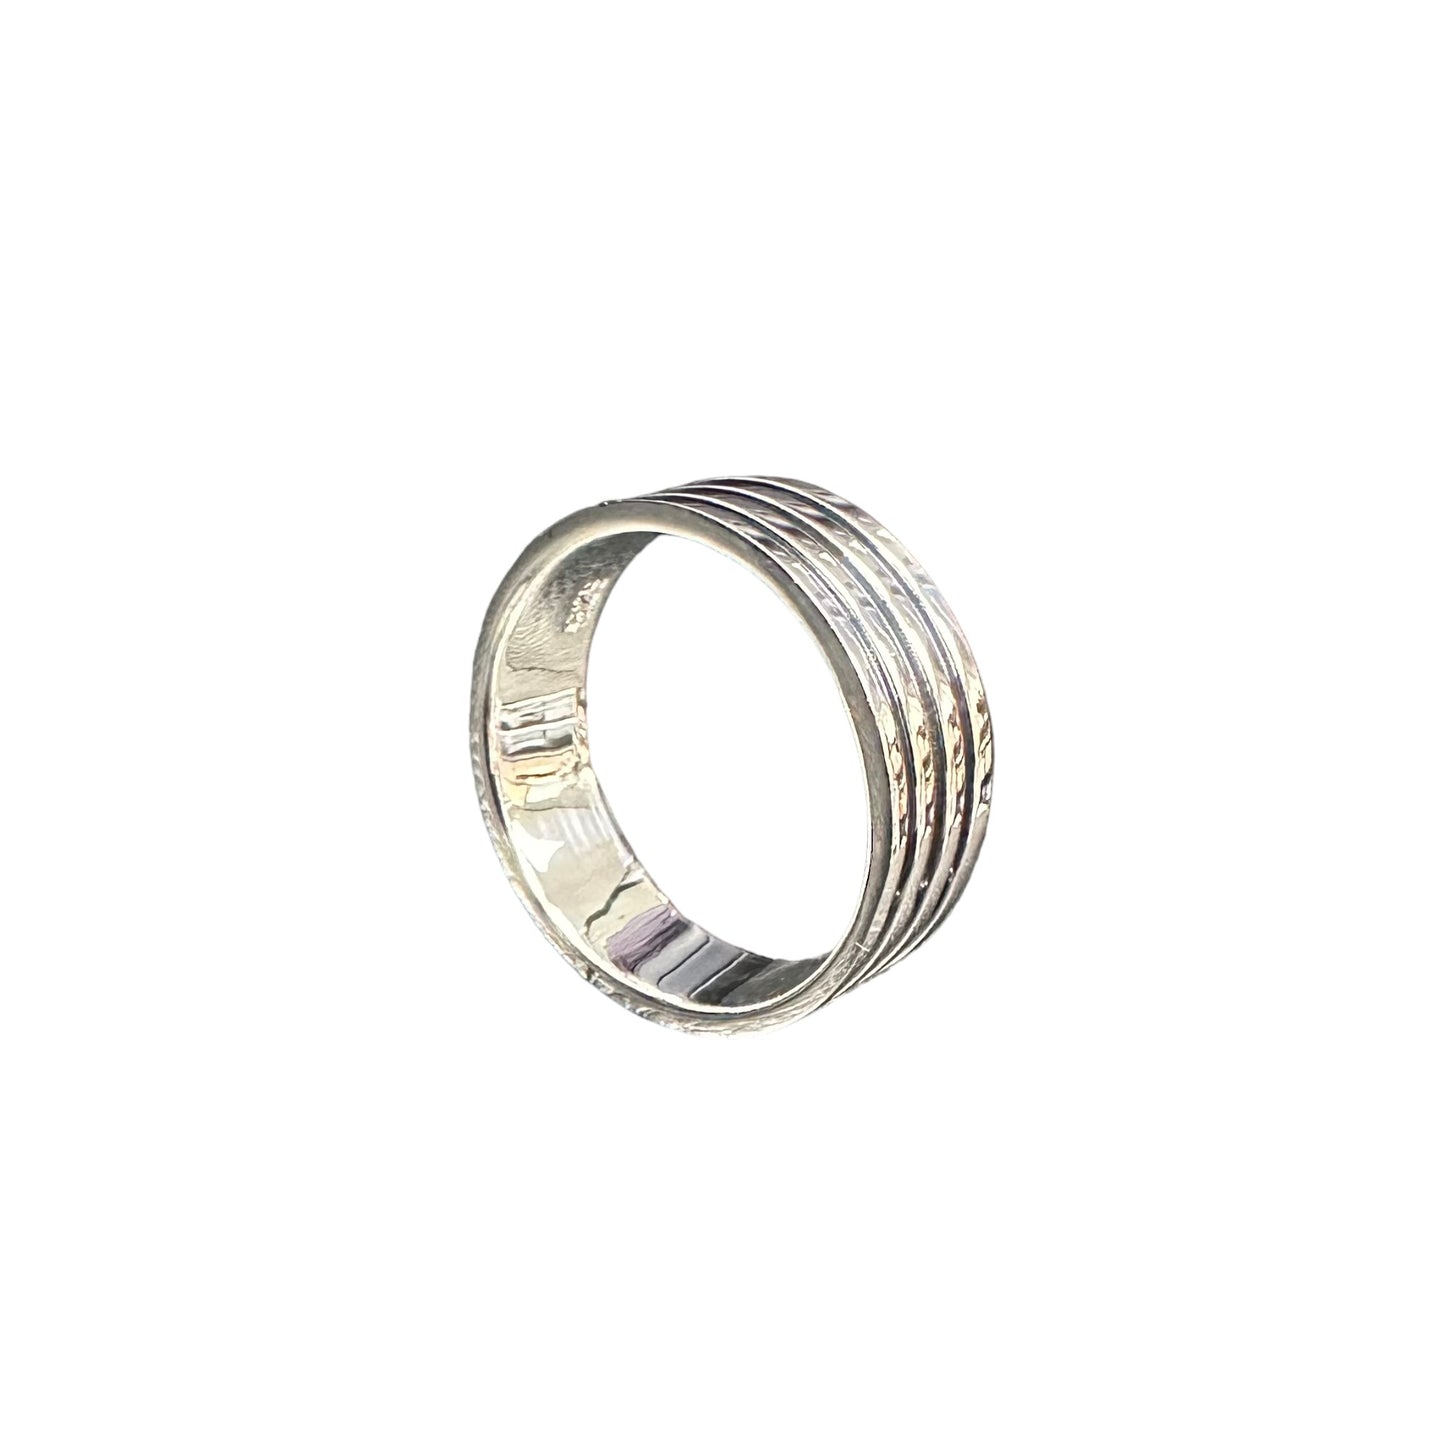 4-Row 8mm Band Ring Sterling Silver